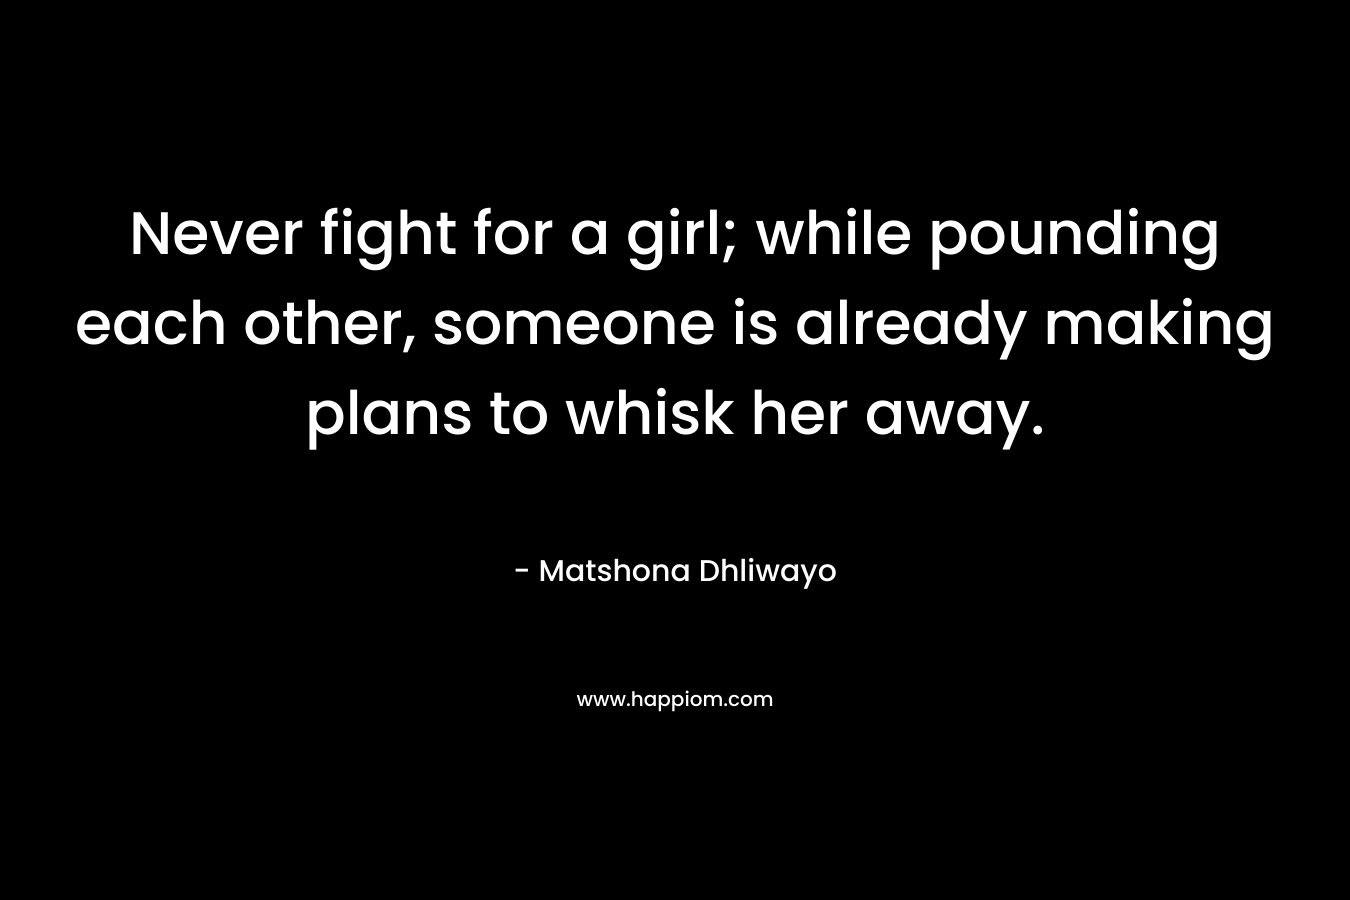 Never fight for a girl; while pounding each other, someone is already making plans to whisk her away. – Matshona Dhliwayo